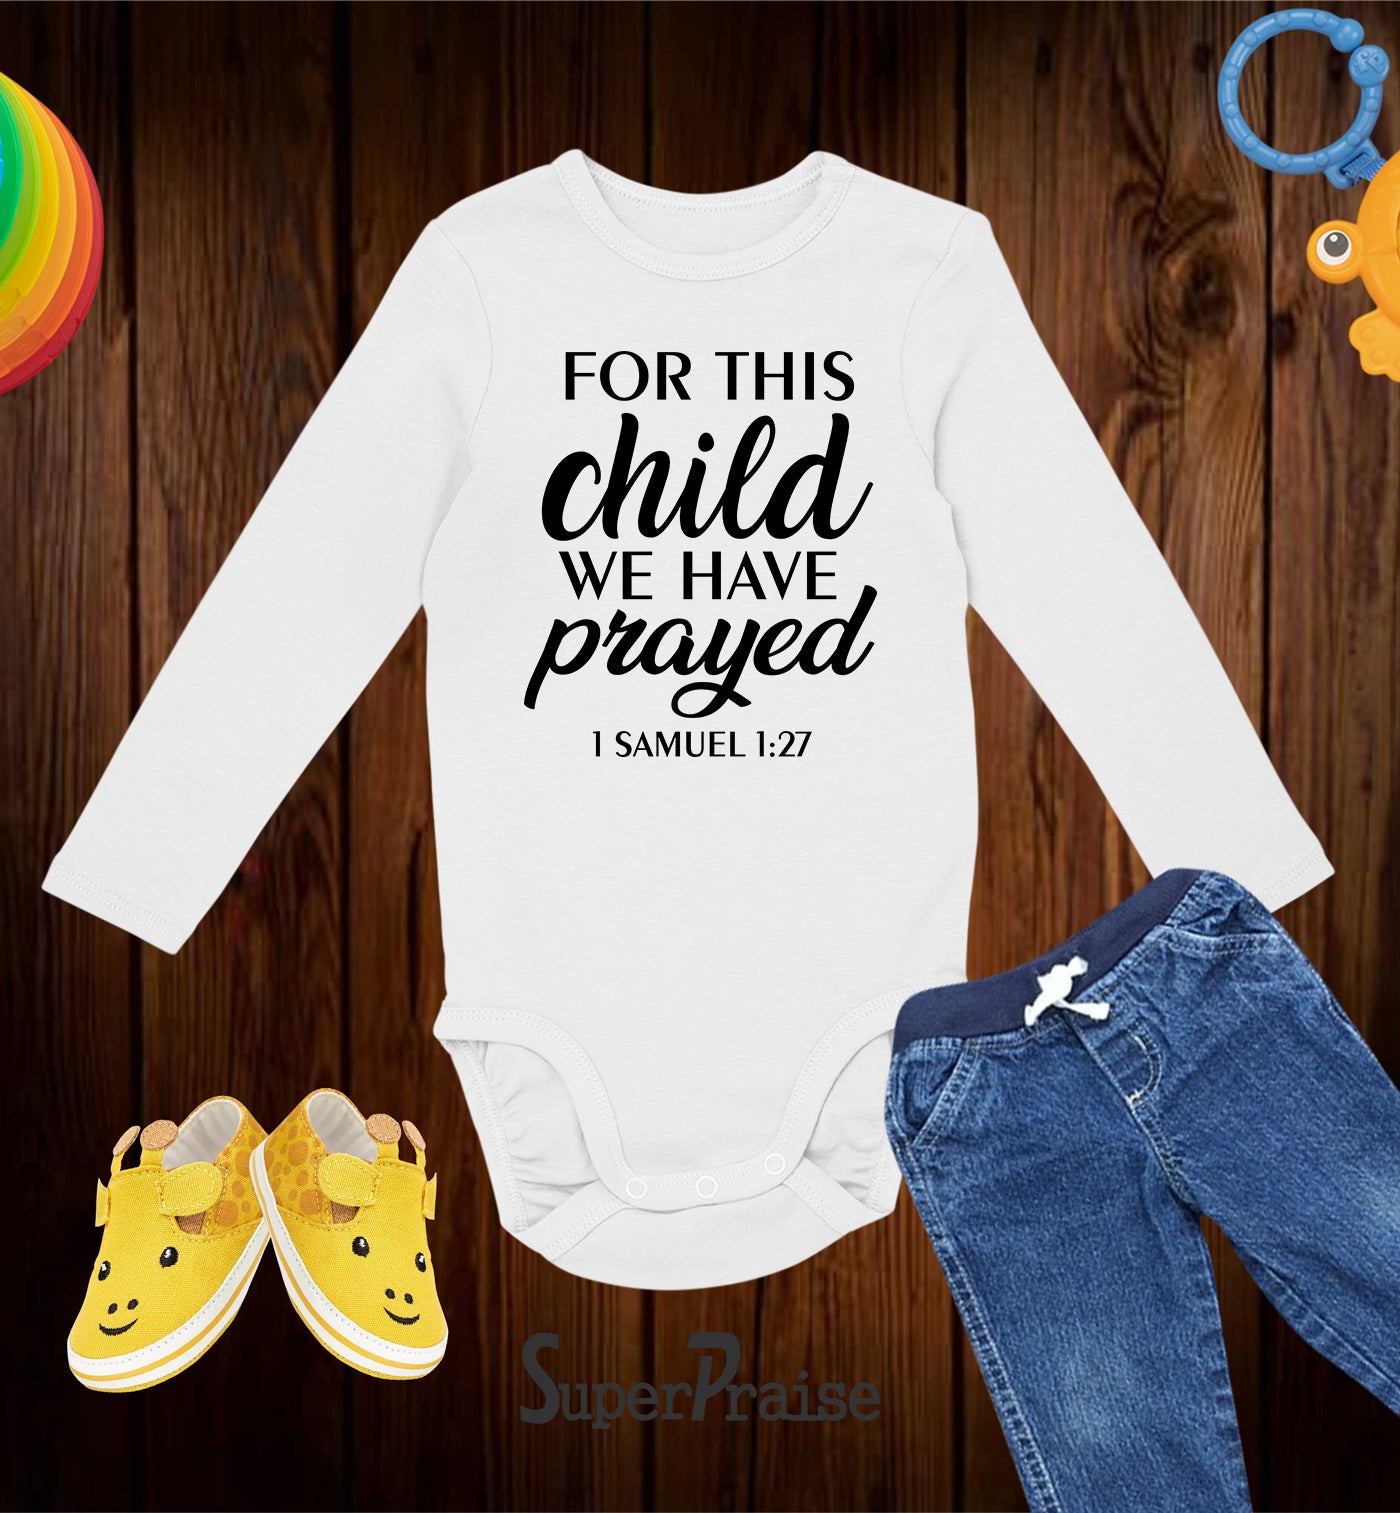 For This Child We Have Prayed 1 Samuel 1:27 Christian Baby Bodysuit